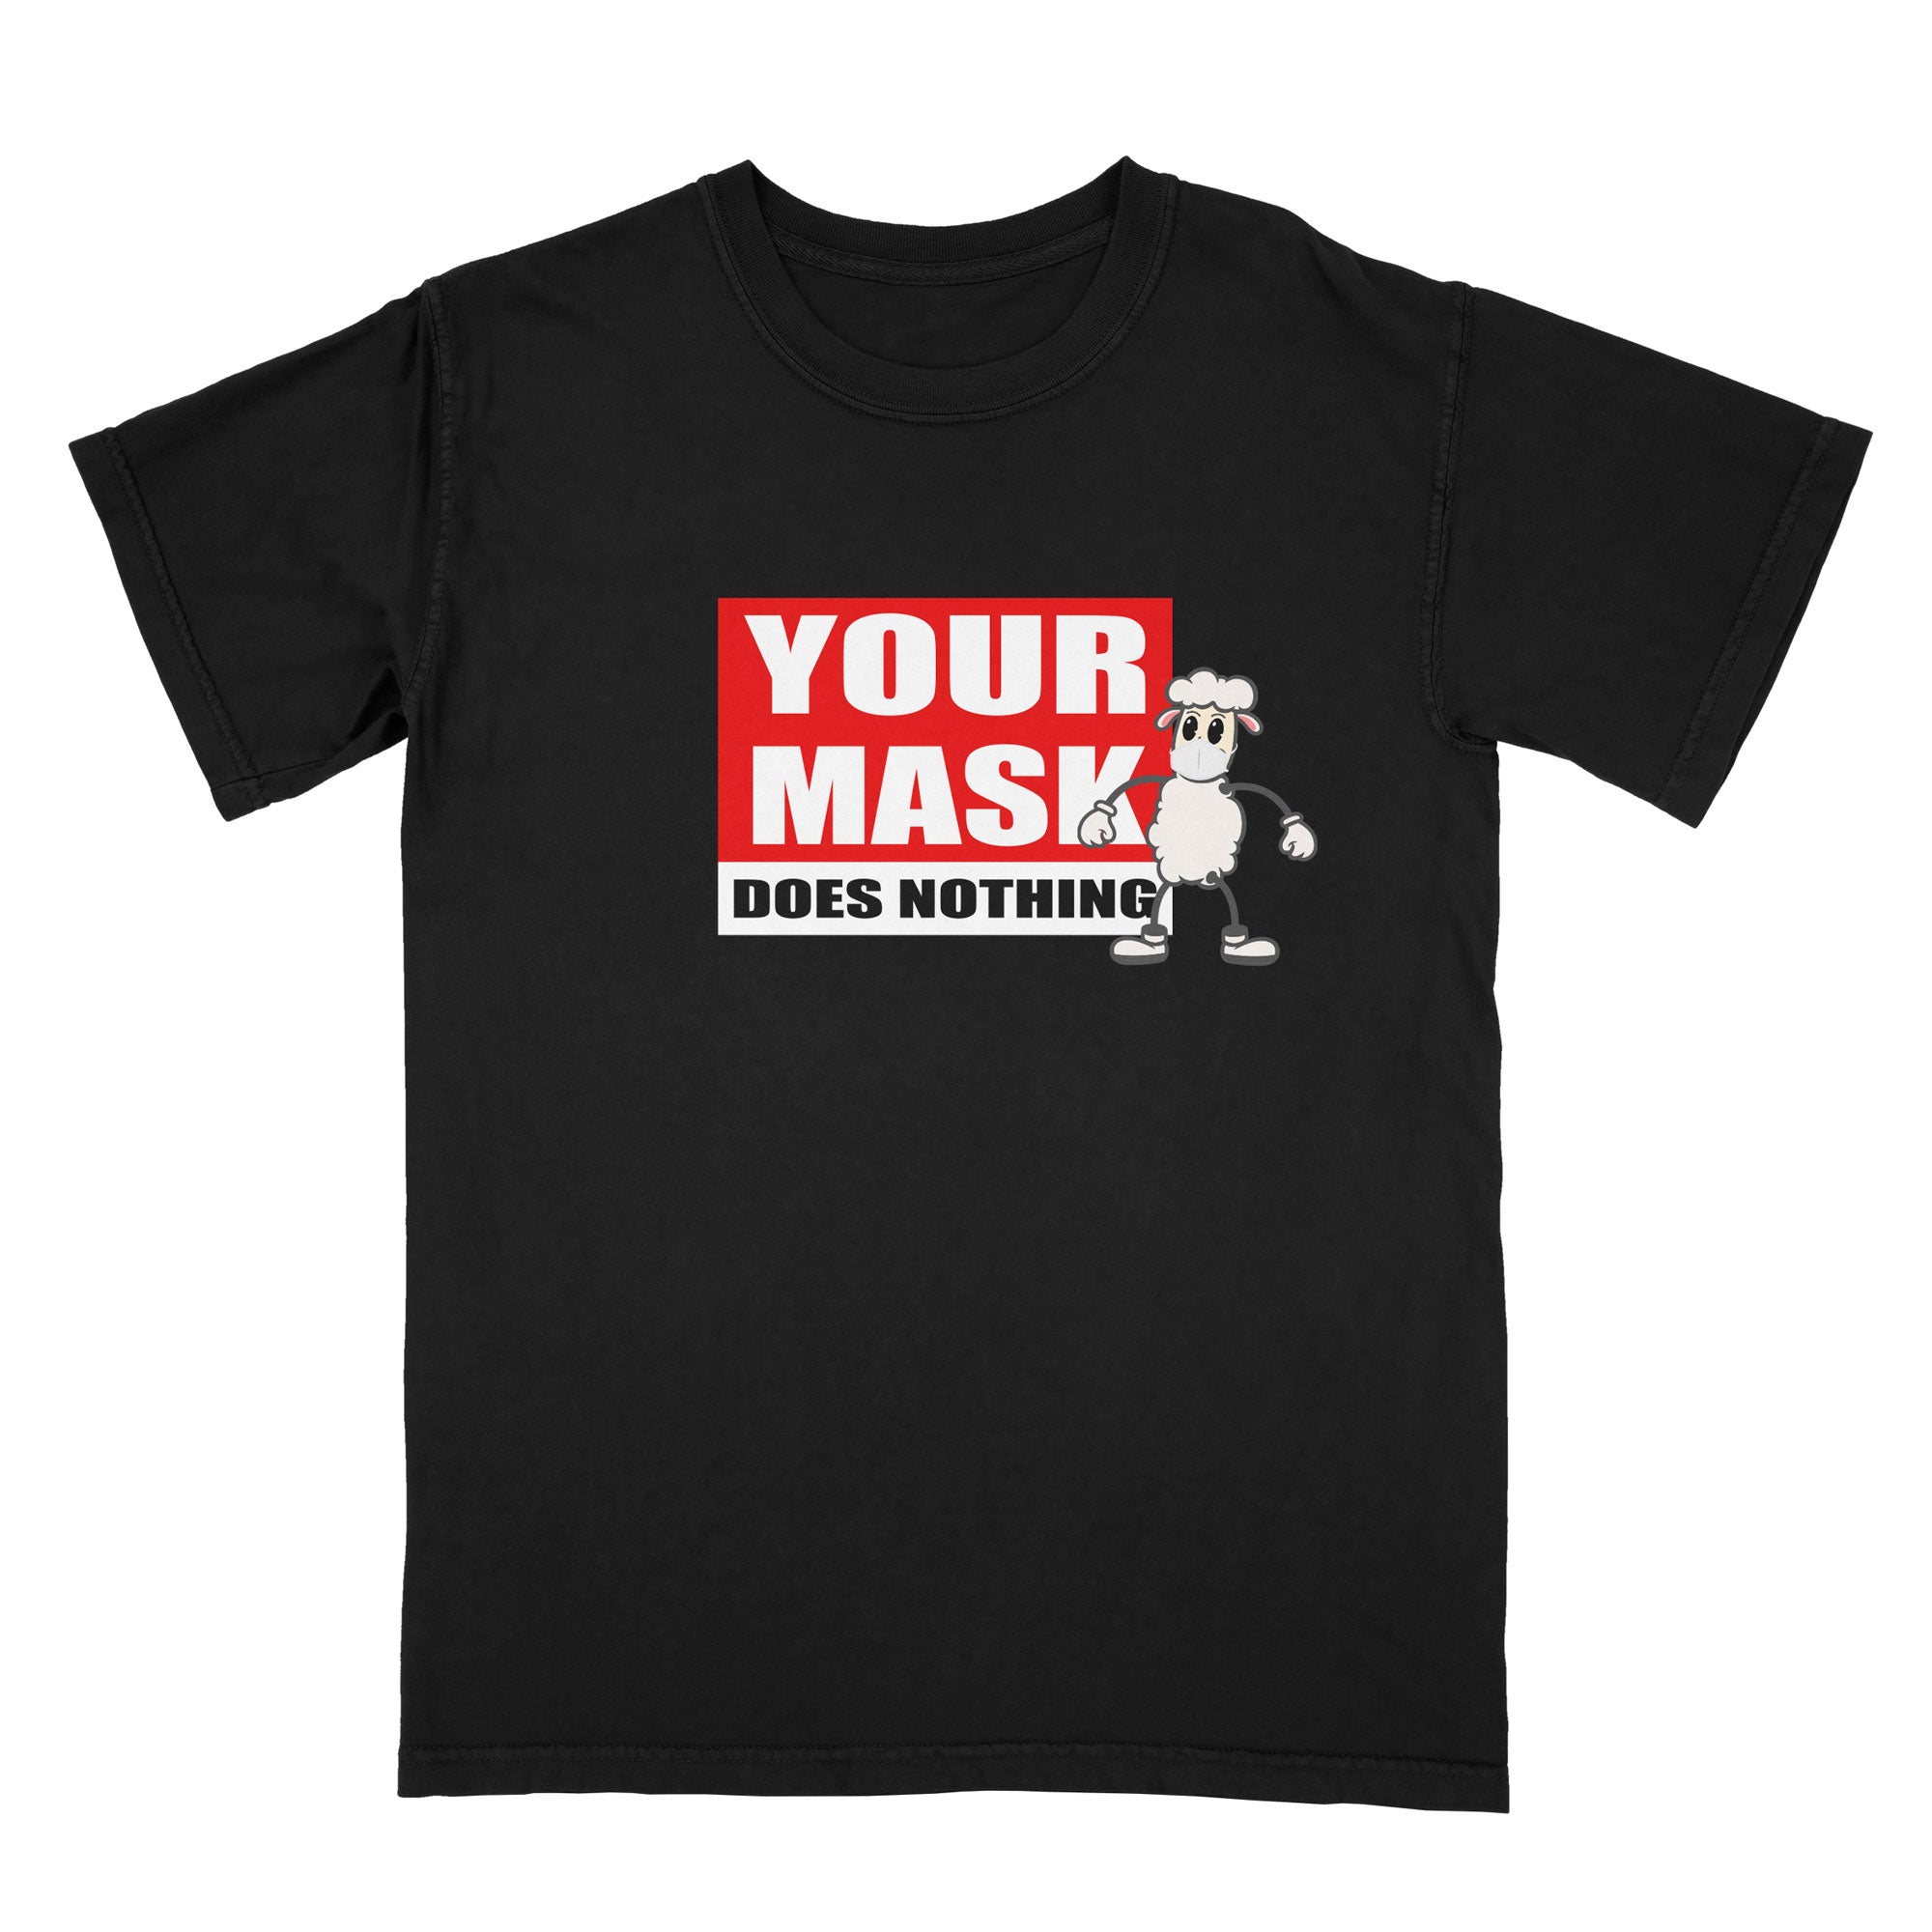 Your Mask Does Nothing Tee